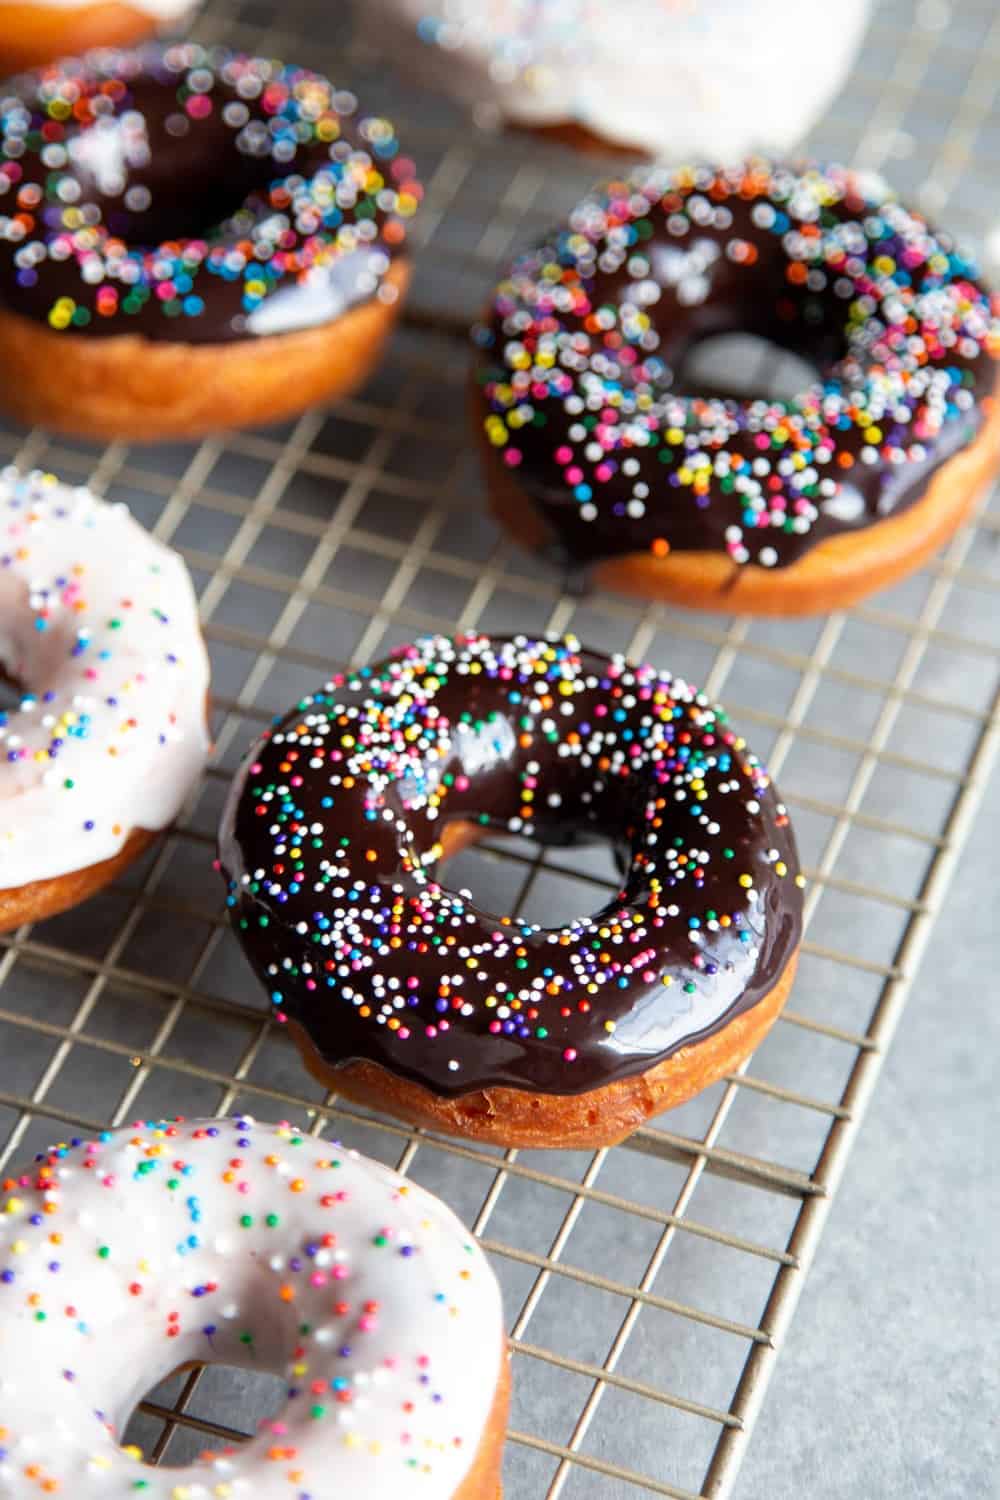 Glazed donuts with sprinkles on a wire rack